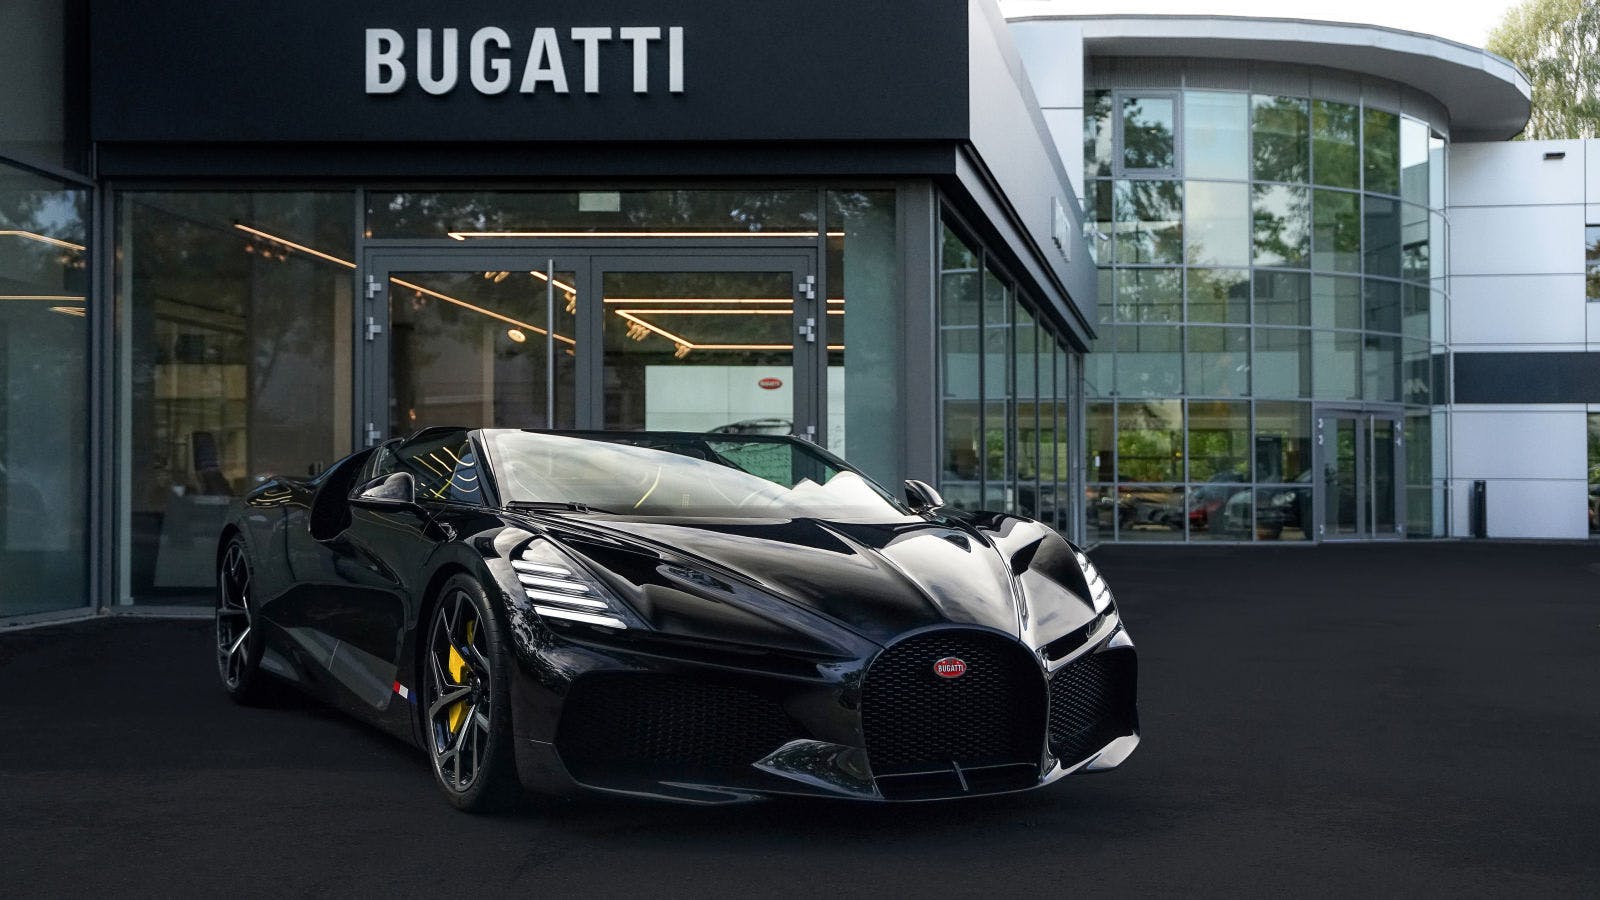 Operated by the Kamps Group since 2009, Bugatti Hamburg now moves to an entirely new setting.